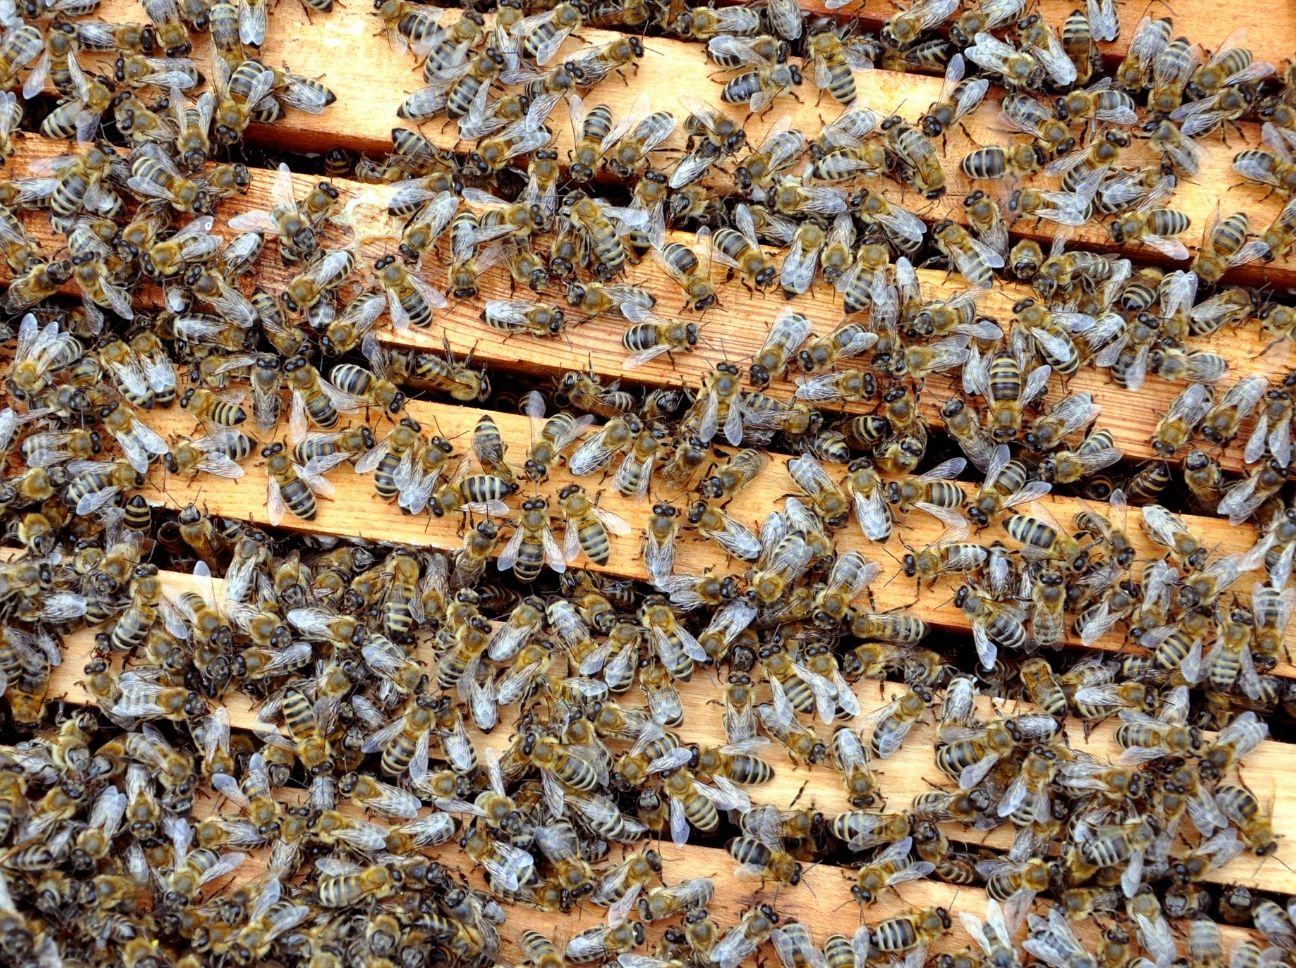 Where do Canadian beekeepers get spring bees?